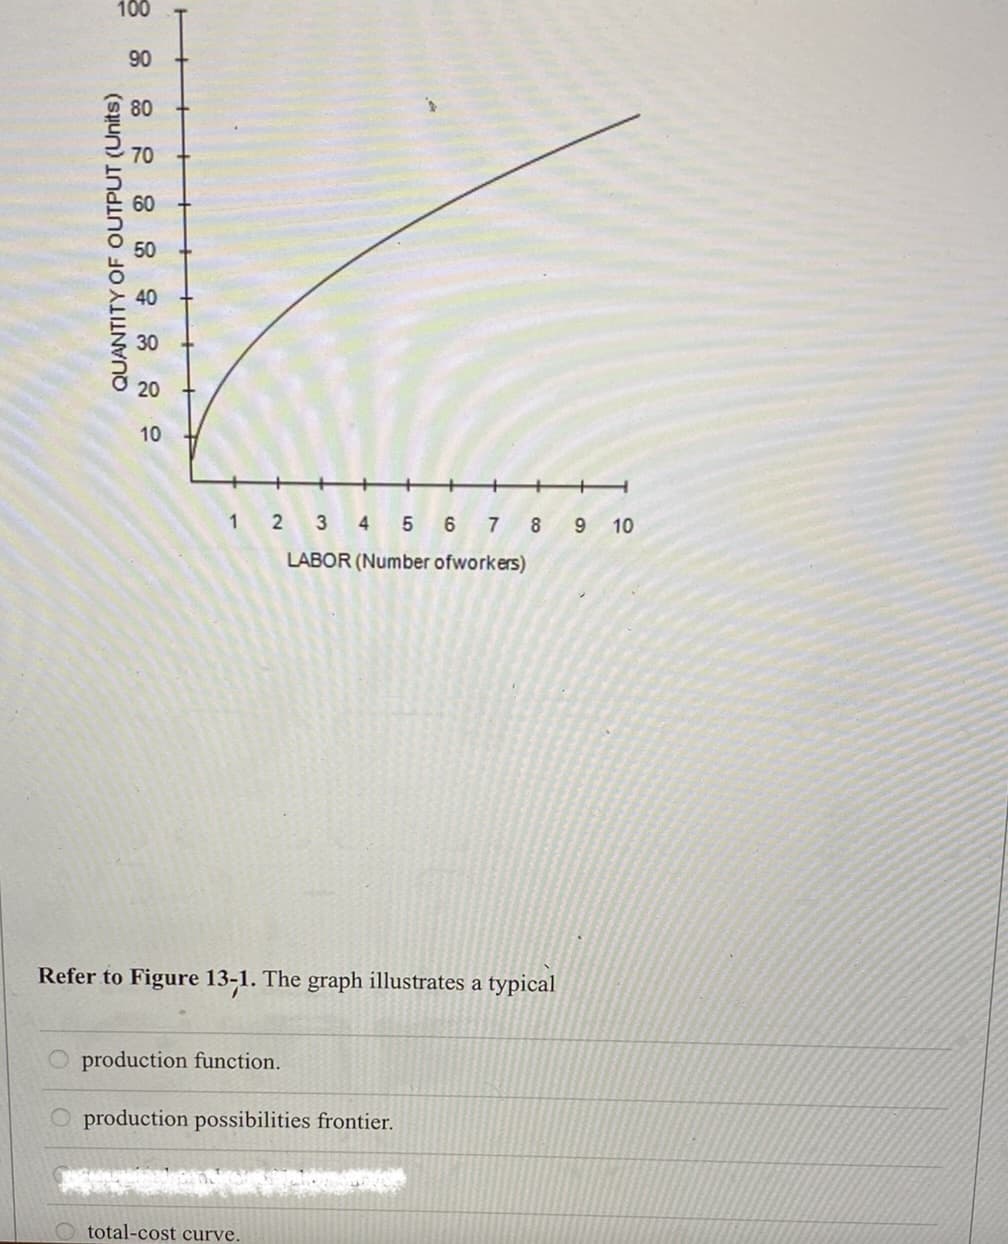 100
QUANTITY OF OUTPUT (Units)
90
80
70
60
30
20
10
8
1 2 3 4 5 6 7
LABOR (Number ofworkers)
Refer to Figure 13-1. The graph illustrates a typical
production function.
O production possibilities frontier.
Ototal-cost curve.
9 10